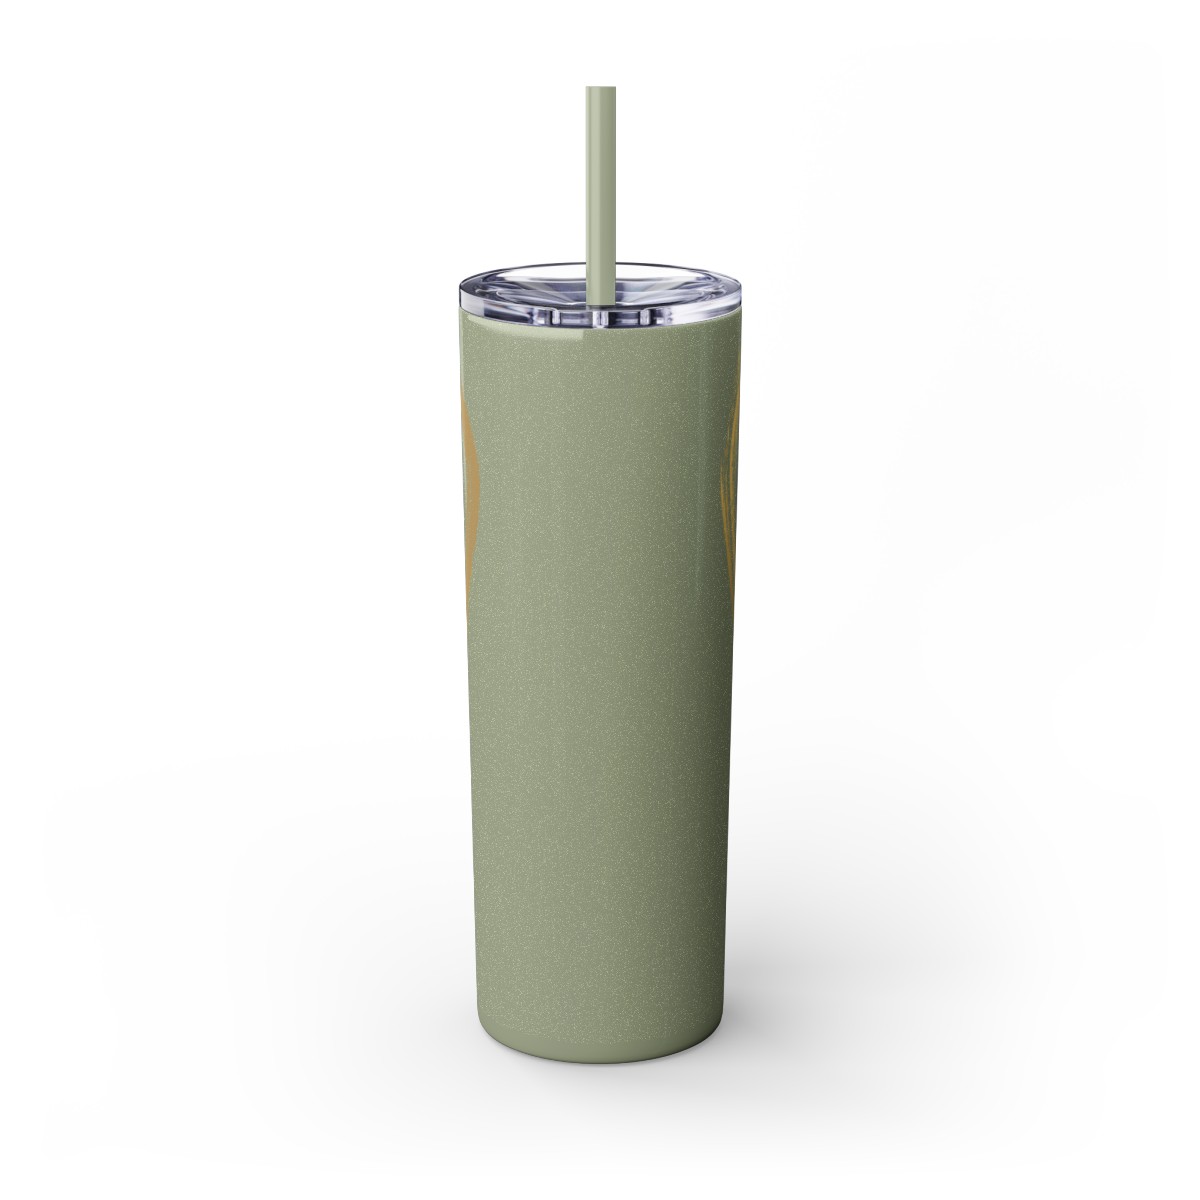 Living My Success Story Skinny Tumbler with Straw, 20oz product thumbnail image